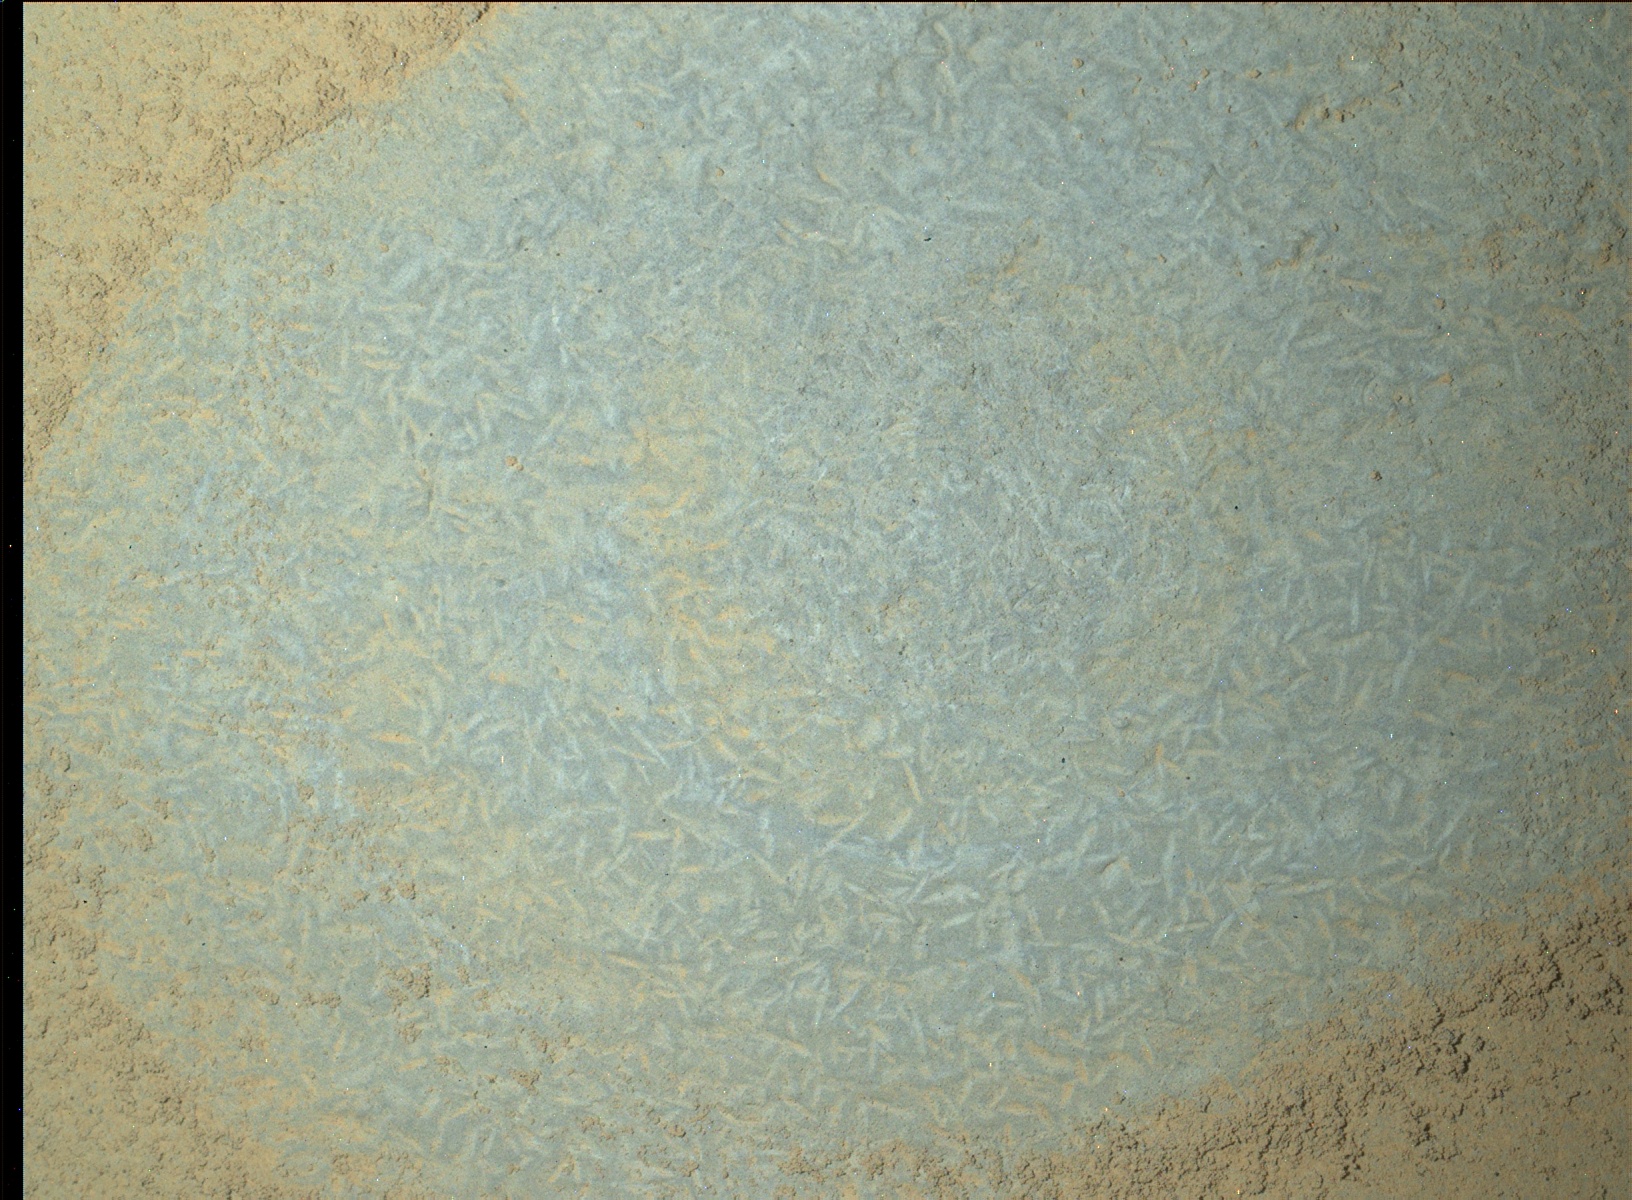 Nasa's Mars rover Curiosity acquired this image using its Mars Hand Lens Imager (MAHLI) on Sol 809